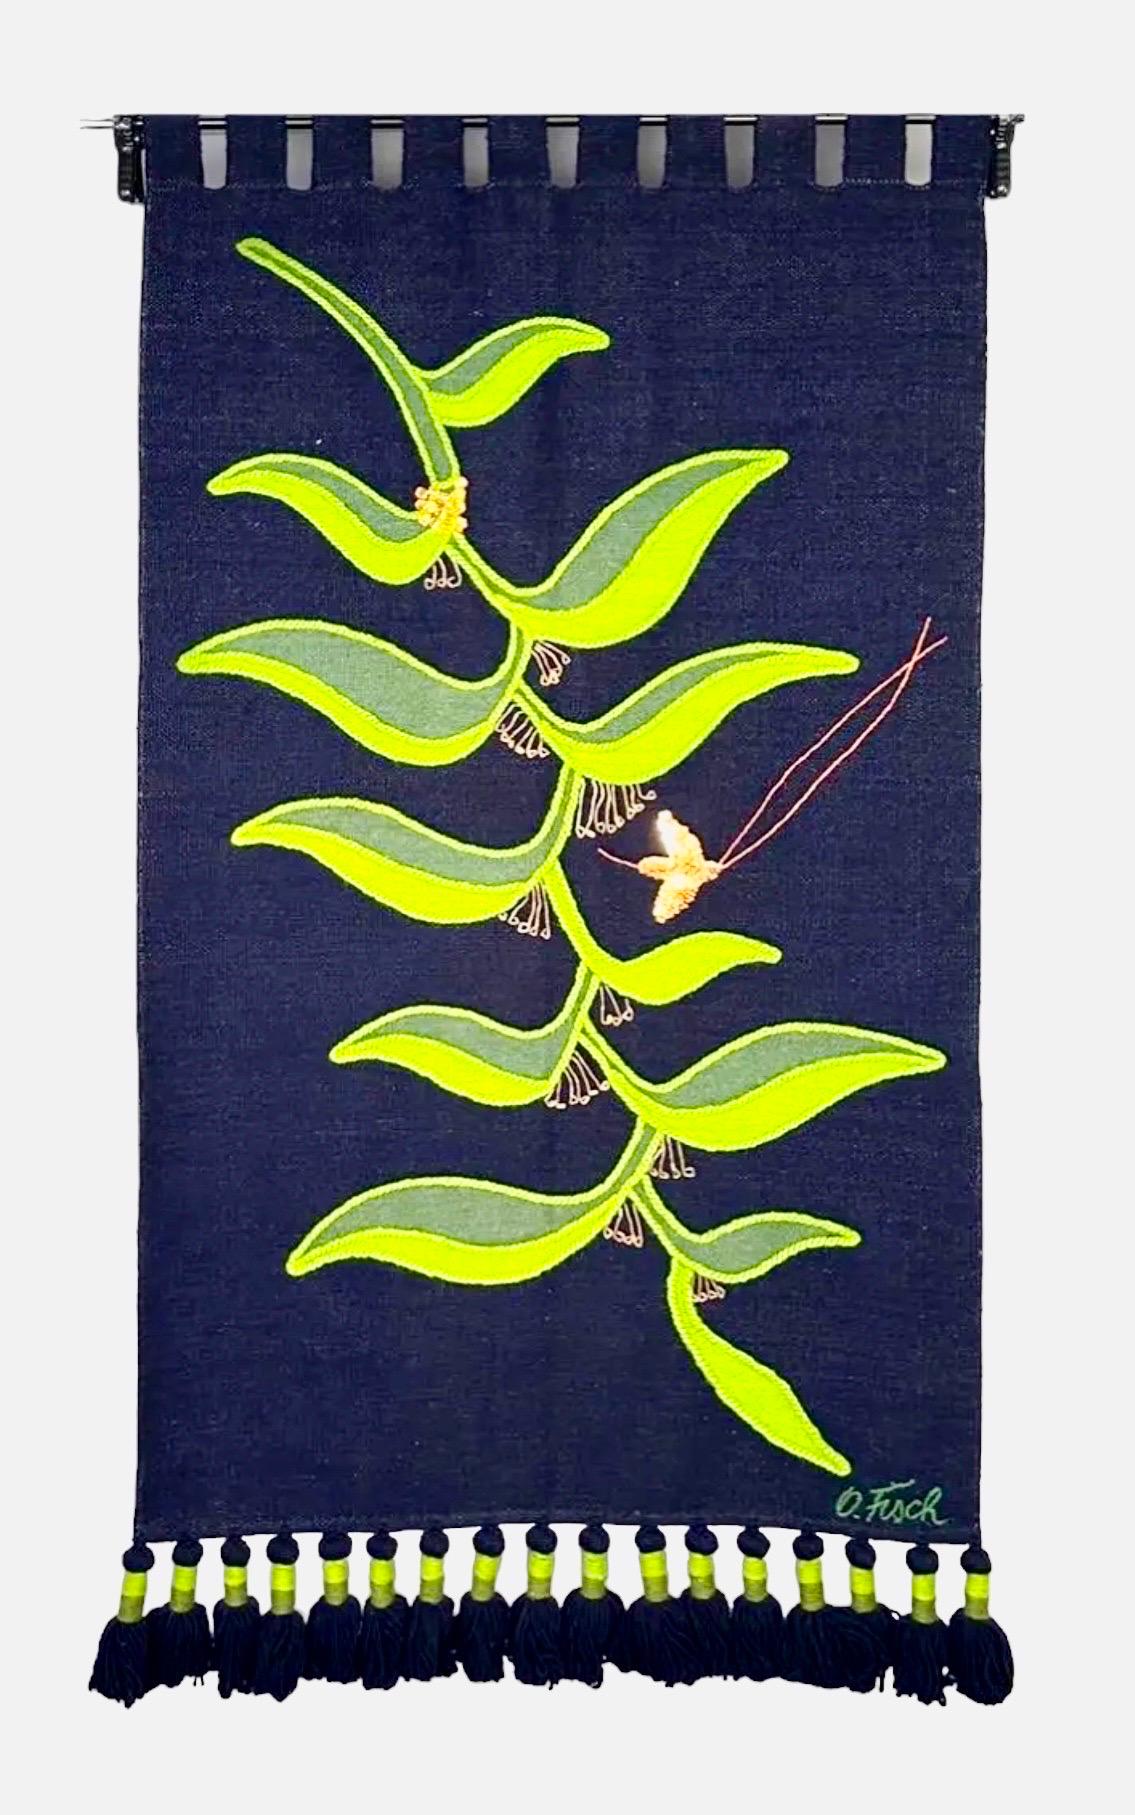 Olga Fisch ( American 1901-1990) 
Hummingbird and Pendant Flower, hand woven and stitched wool and sequins, signed lower right.
Dimensions: 58 x 32 in.

Olga Fisch was born in Hungary, studied in Germany and lived in Morocco and Ethiopia before